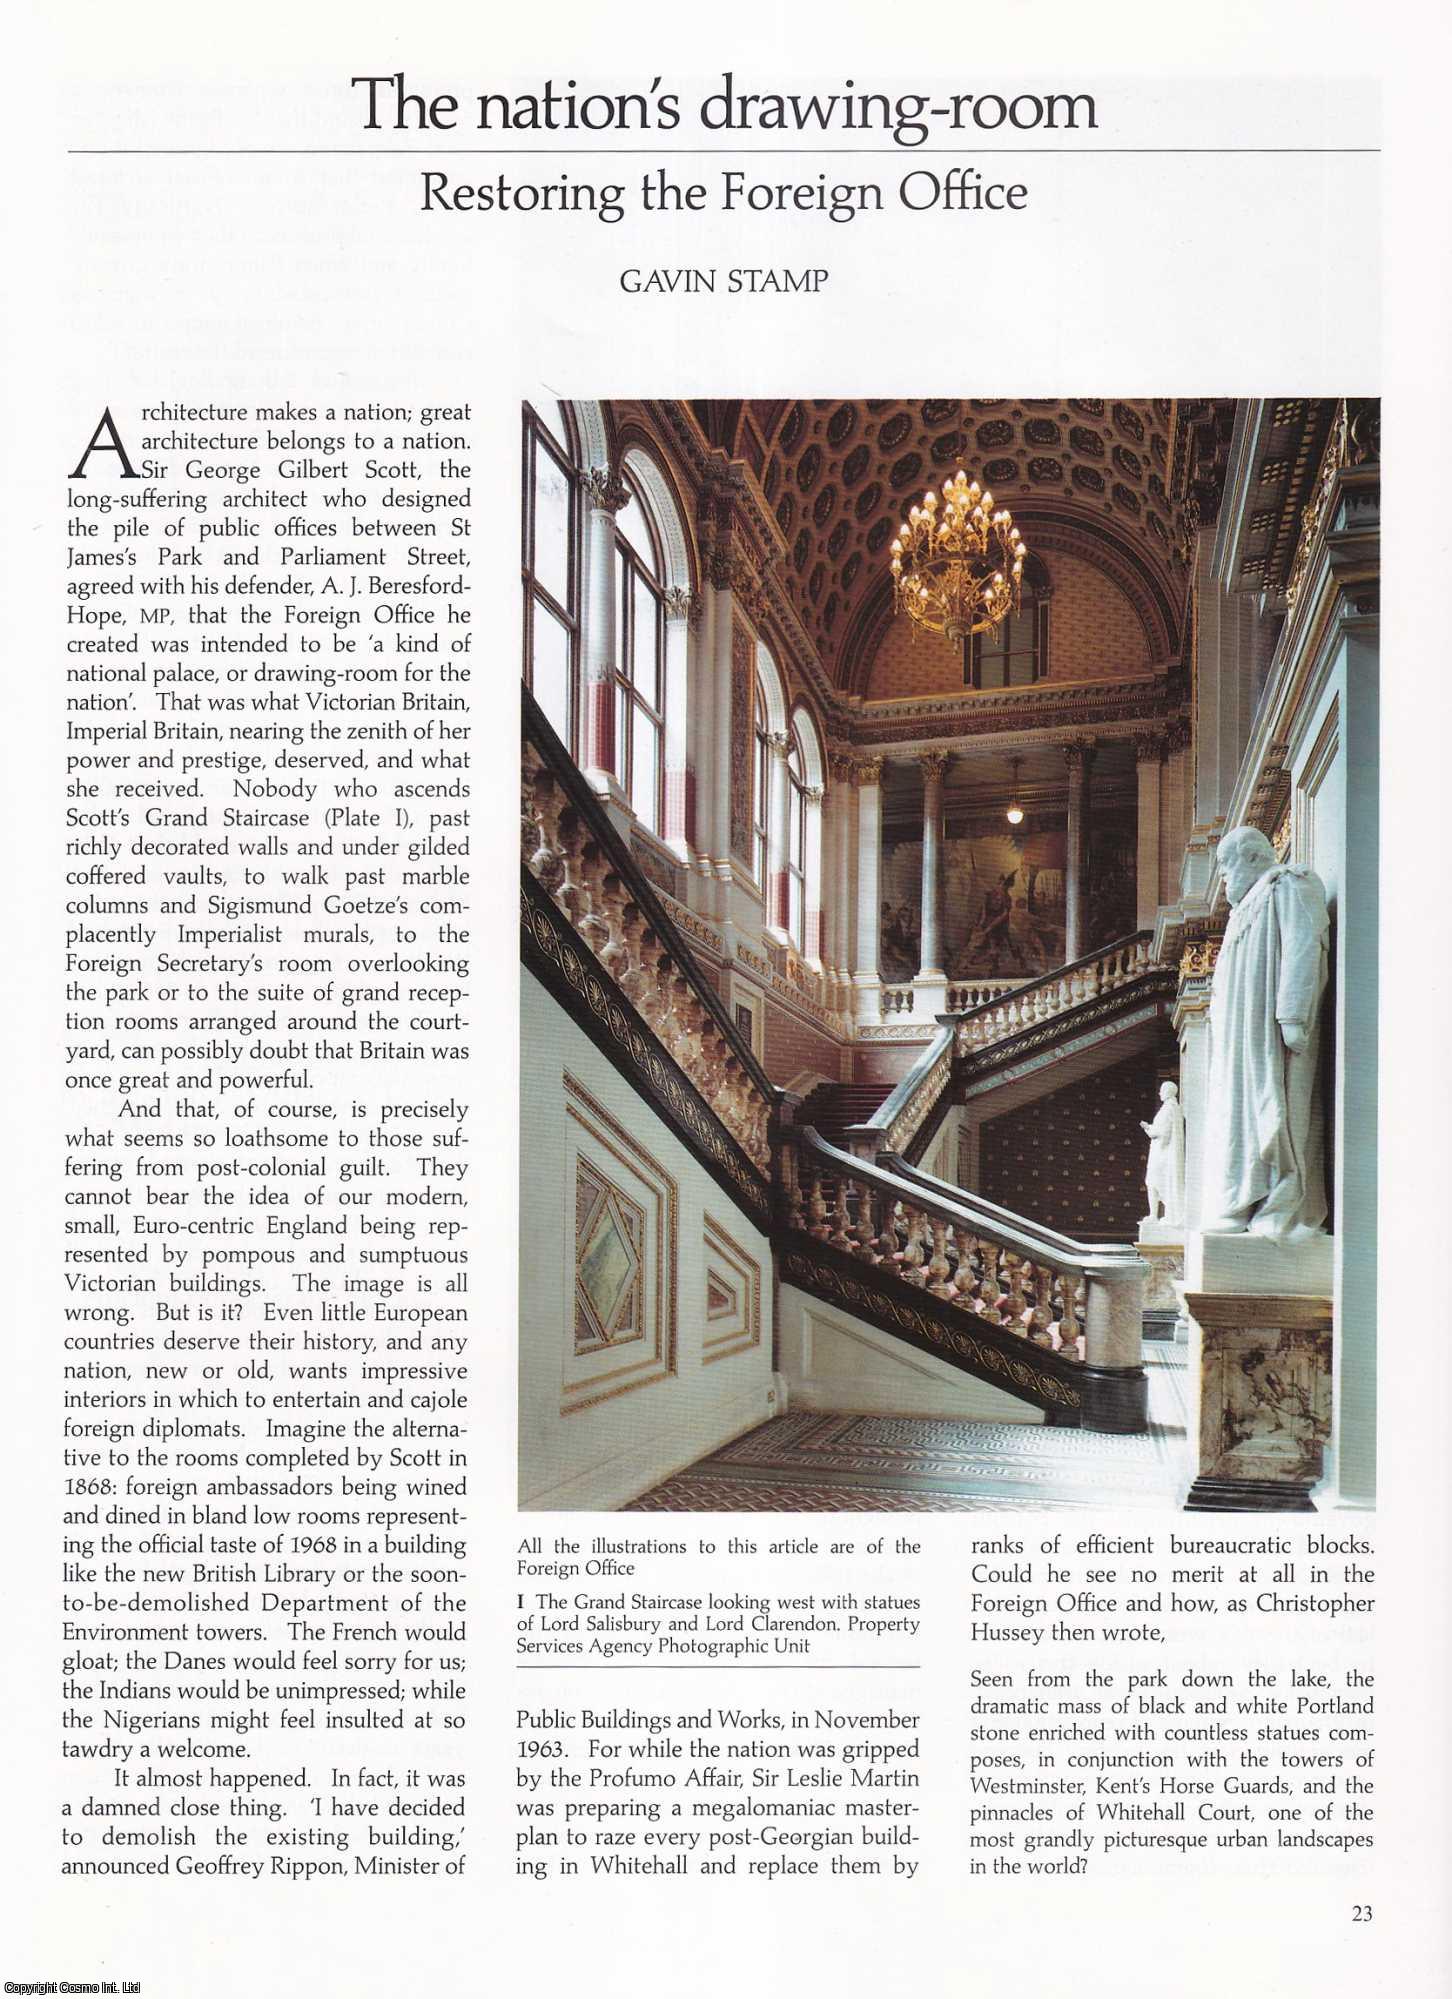 Gavin Stamp - The Nation's Drawing Room: Restoring the Foreign Office. An original article from Apollo, International Magazine of the Arts, 1992.